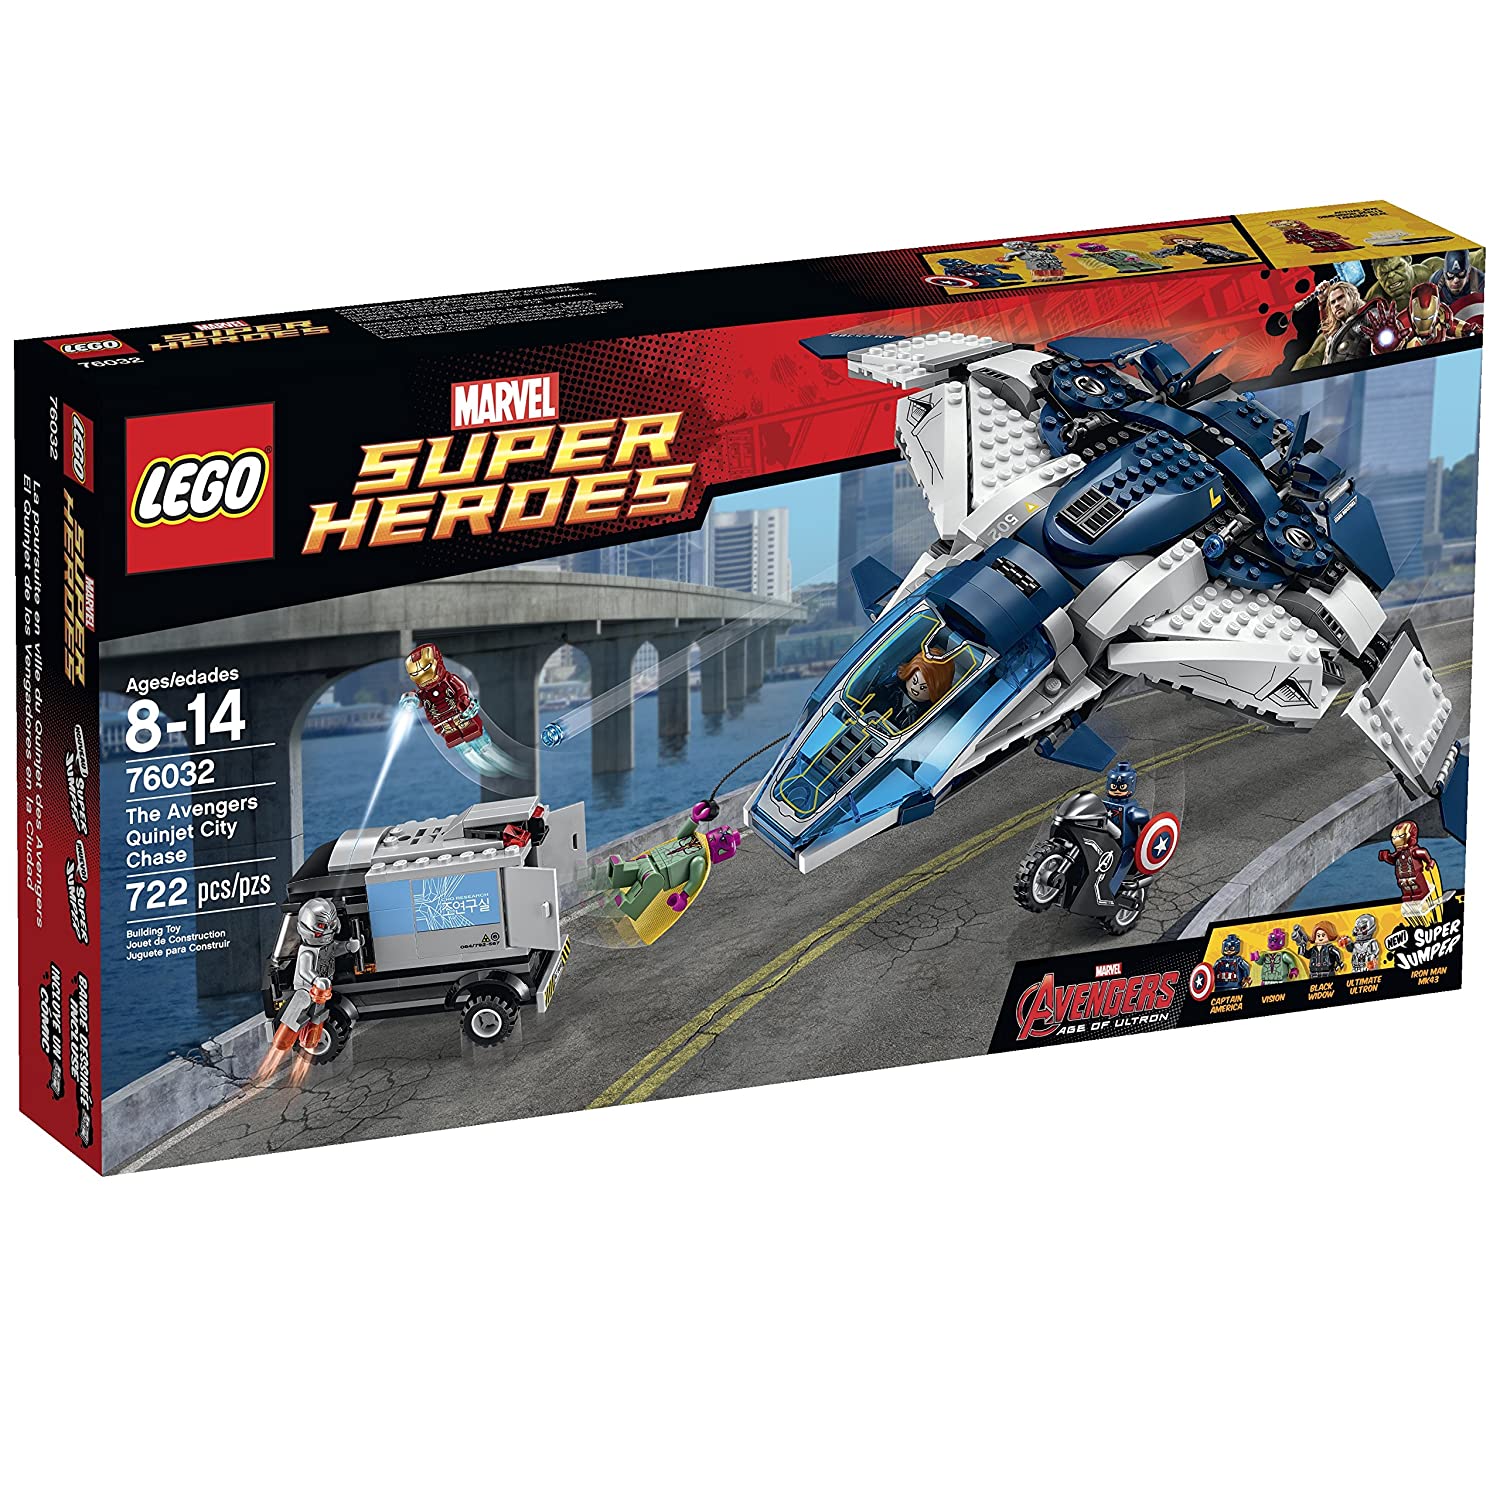 Top 9 Best LEGO Captain America Sets Reviews in 2022 9